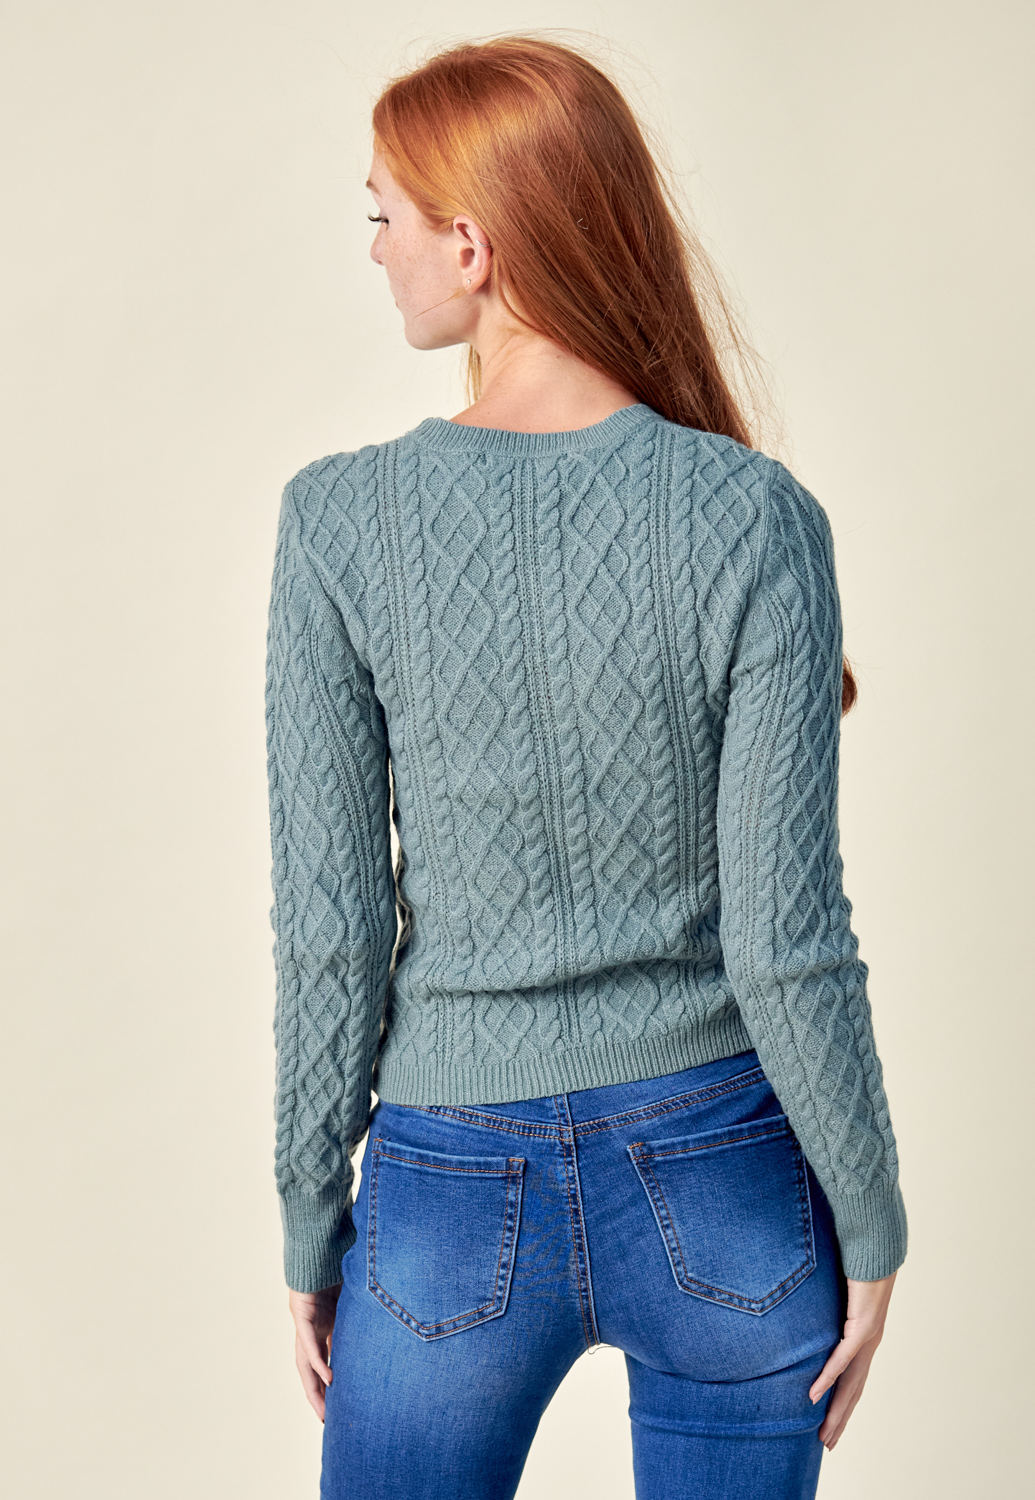 Knit Cut-Out Detail Sweater Top 